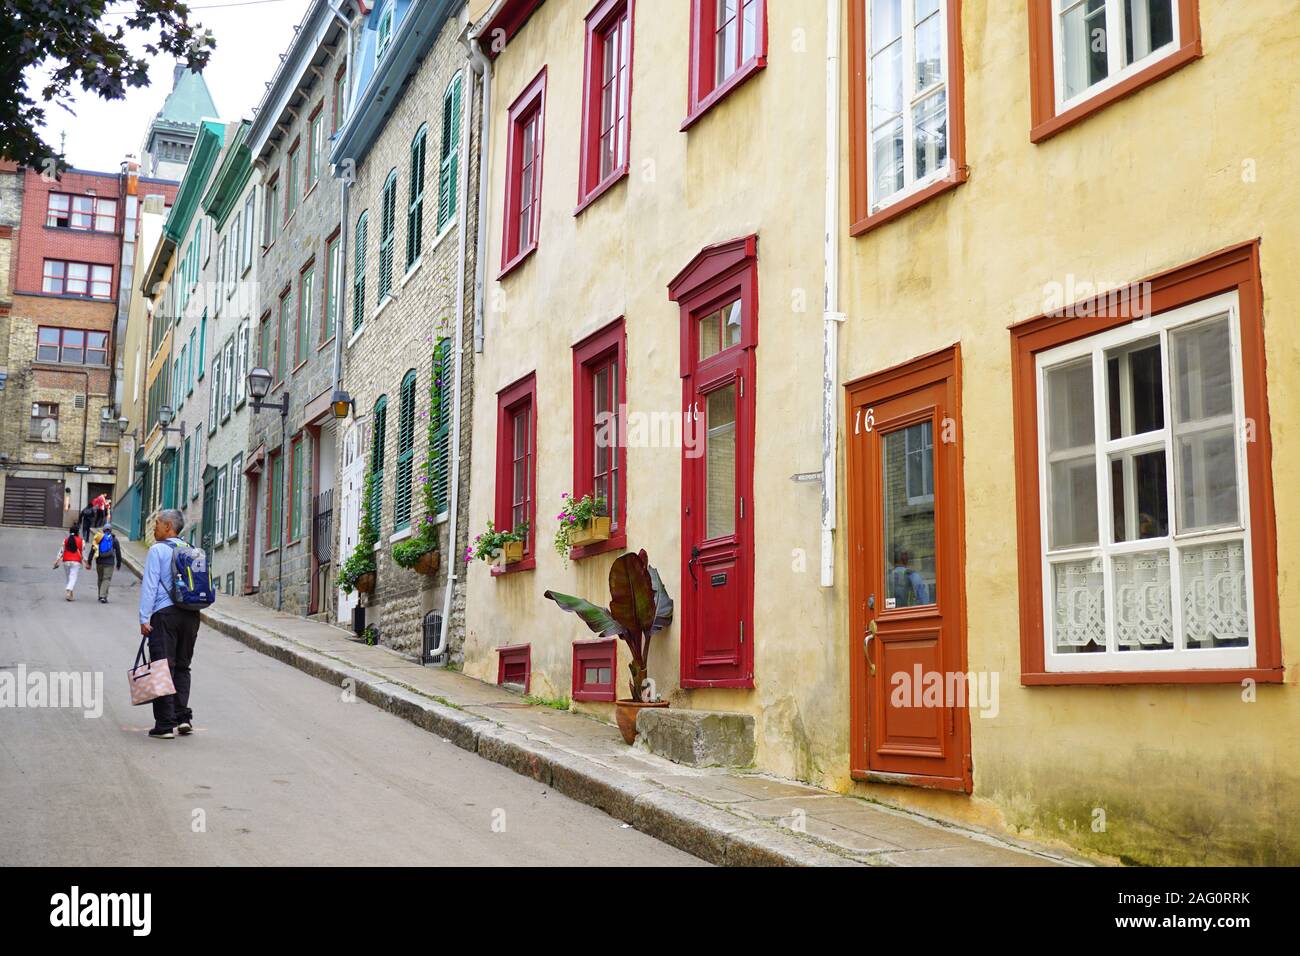 Visitors in Old Quebec City, Canada Stock Photo